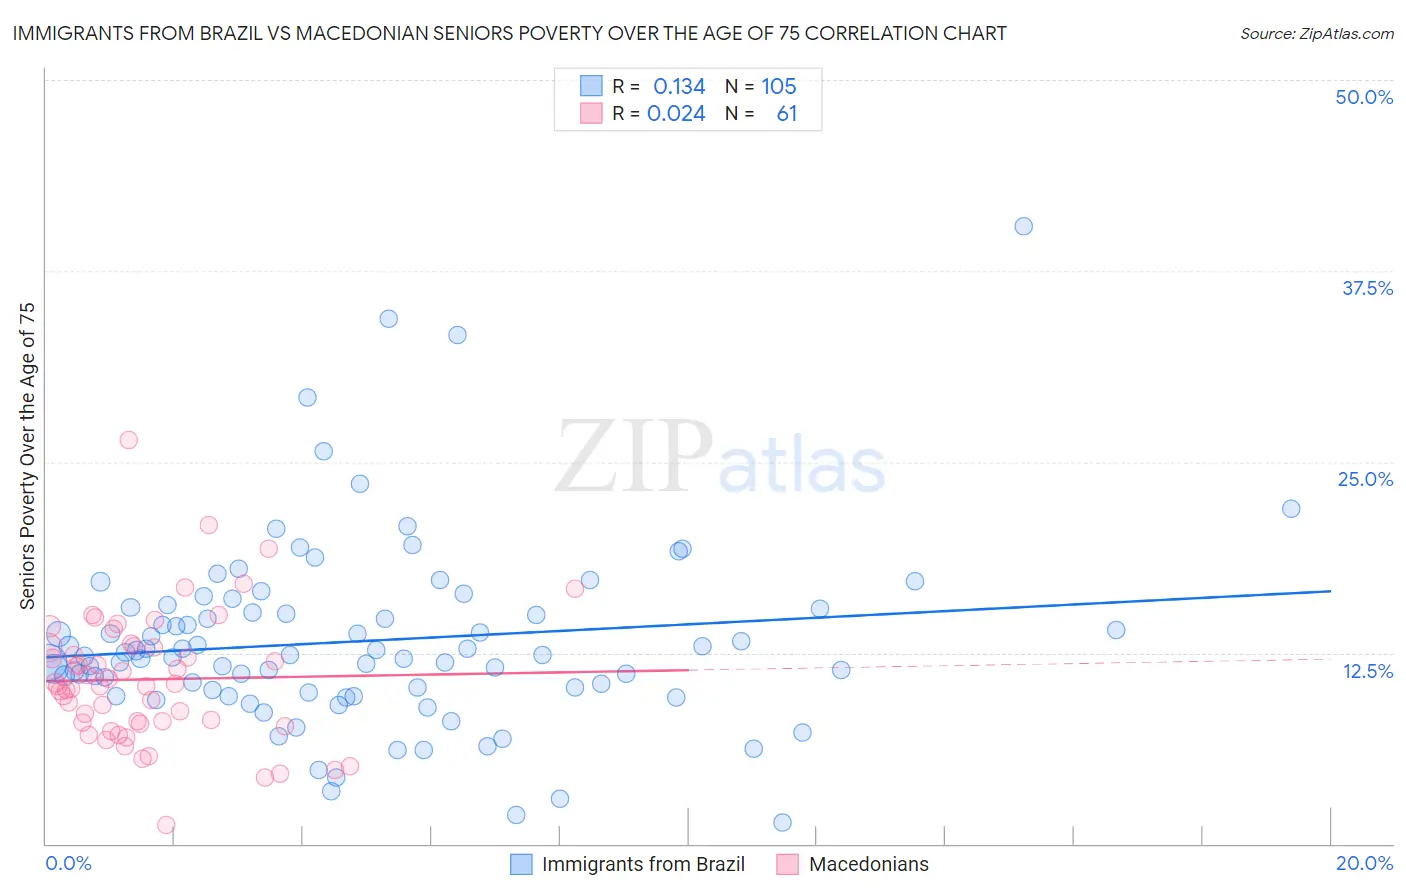 Immigrants from Brazil vs Macedonian Seniors Poverty Over the Age of 75